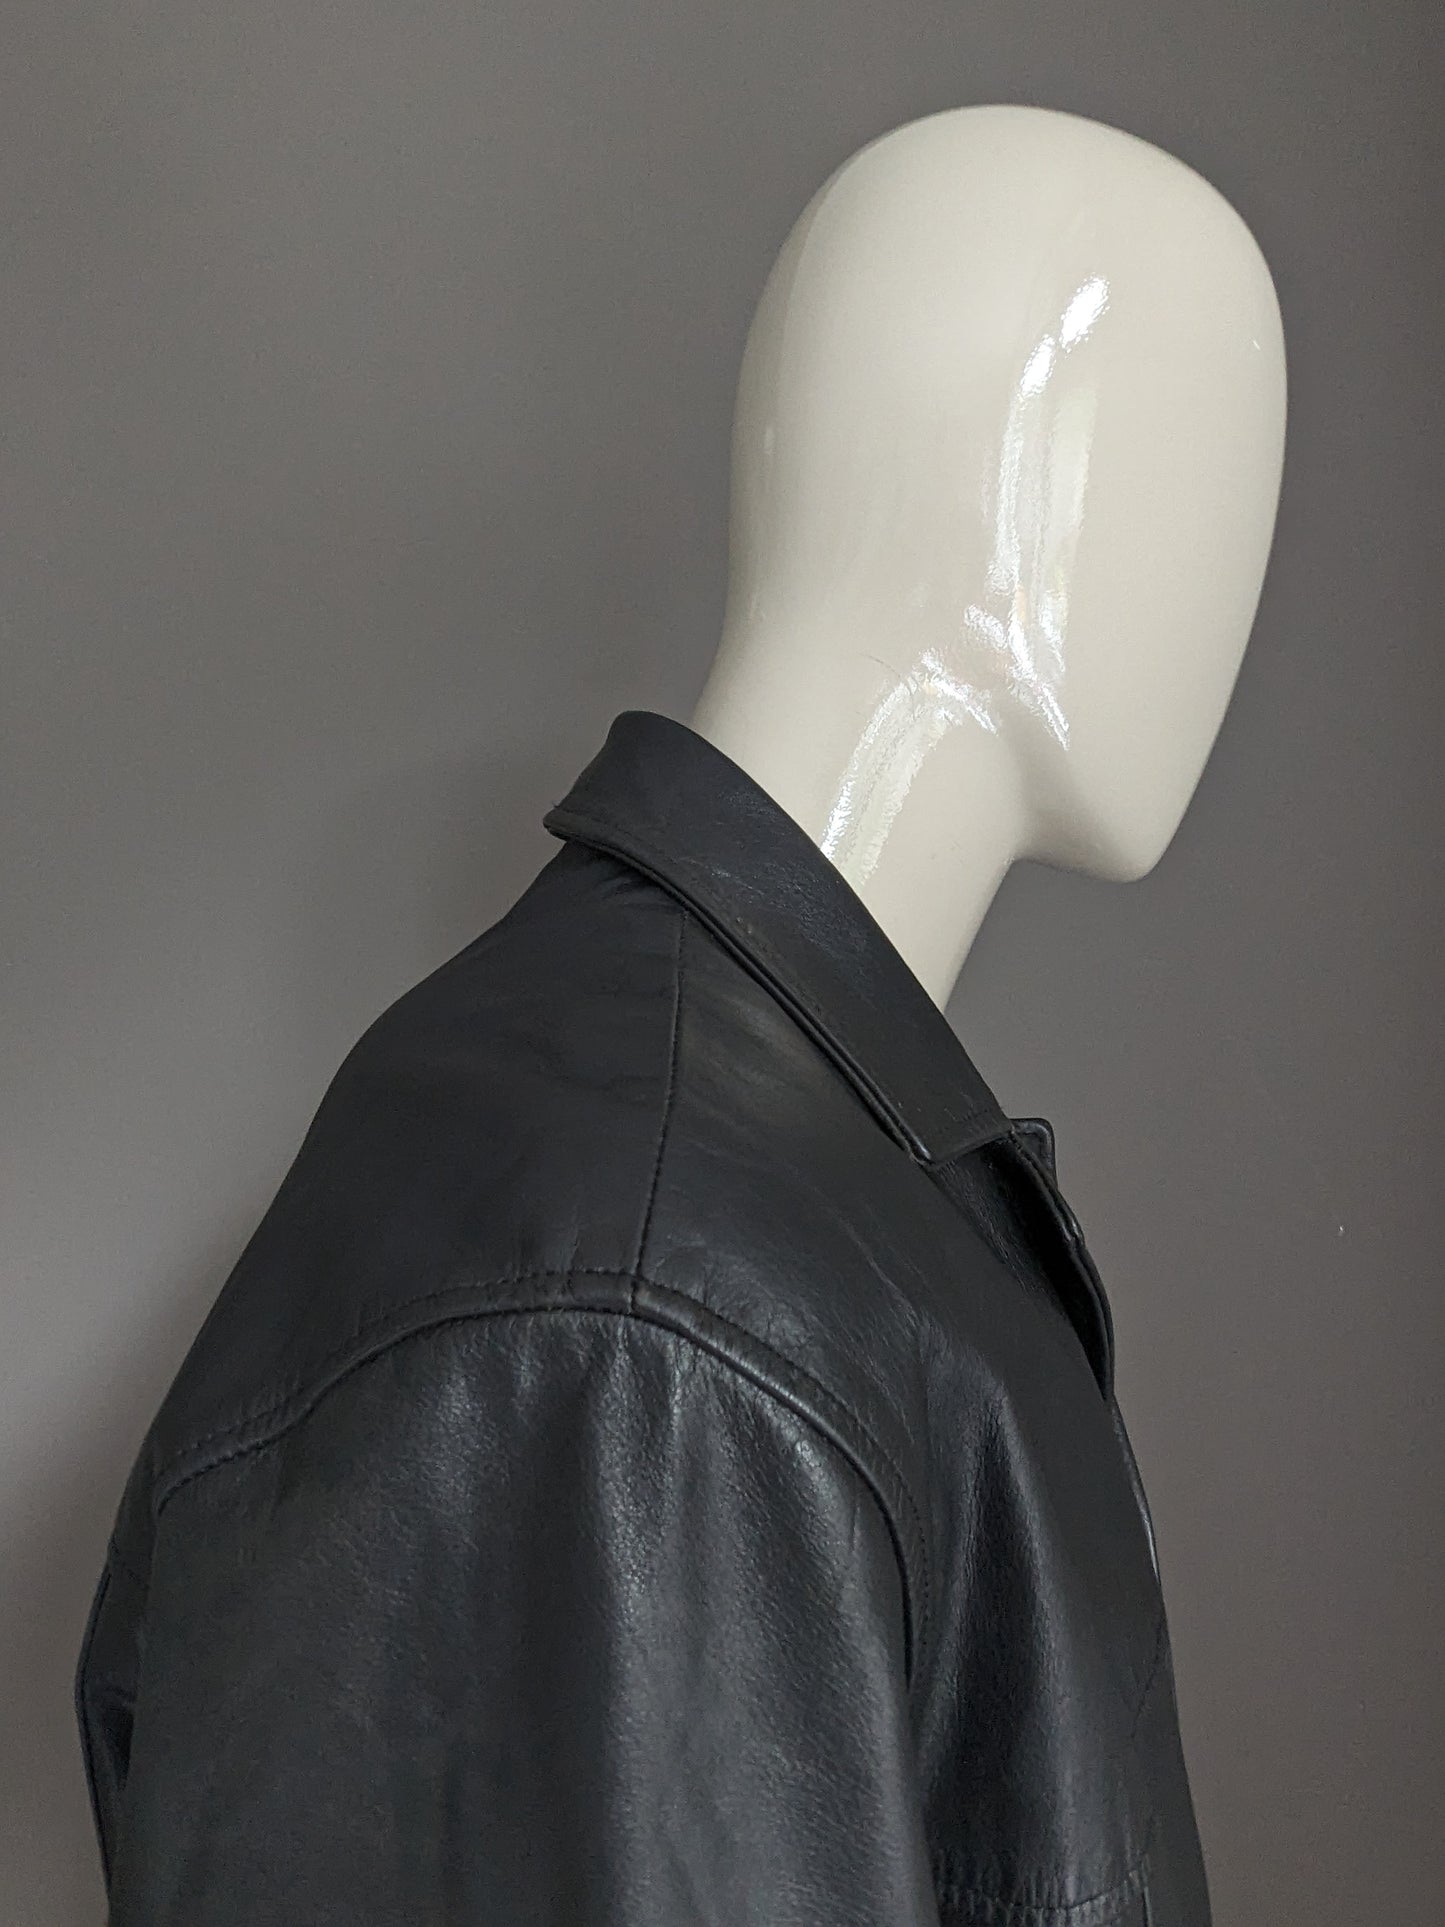 Leather jacket / jacket with buttons. Black colored. Size XL.